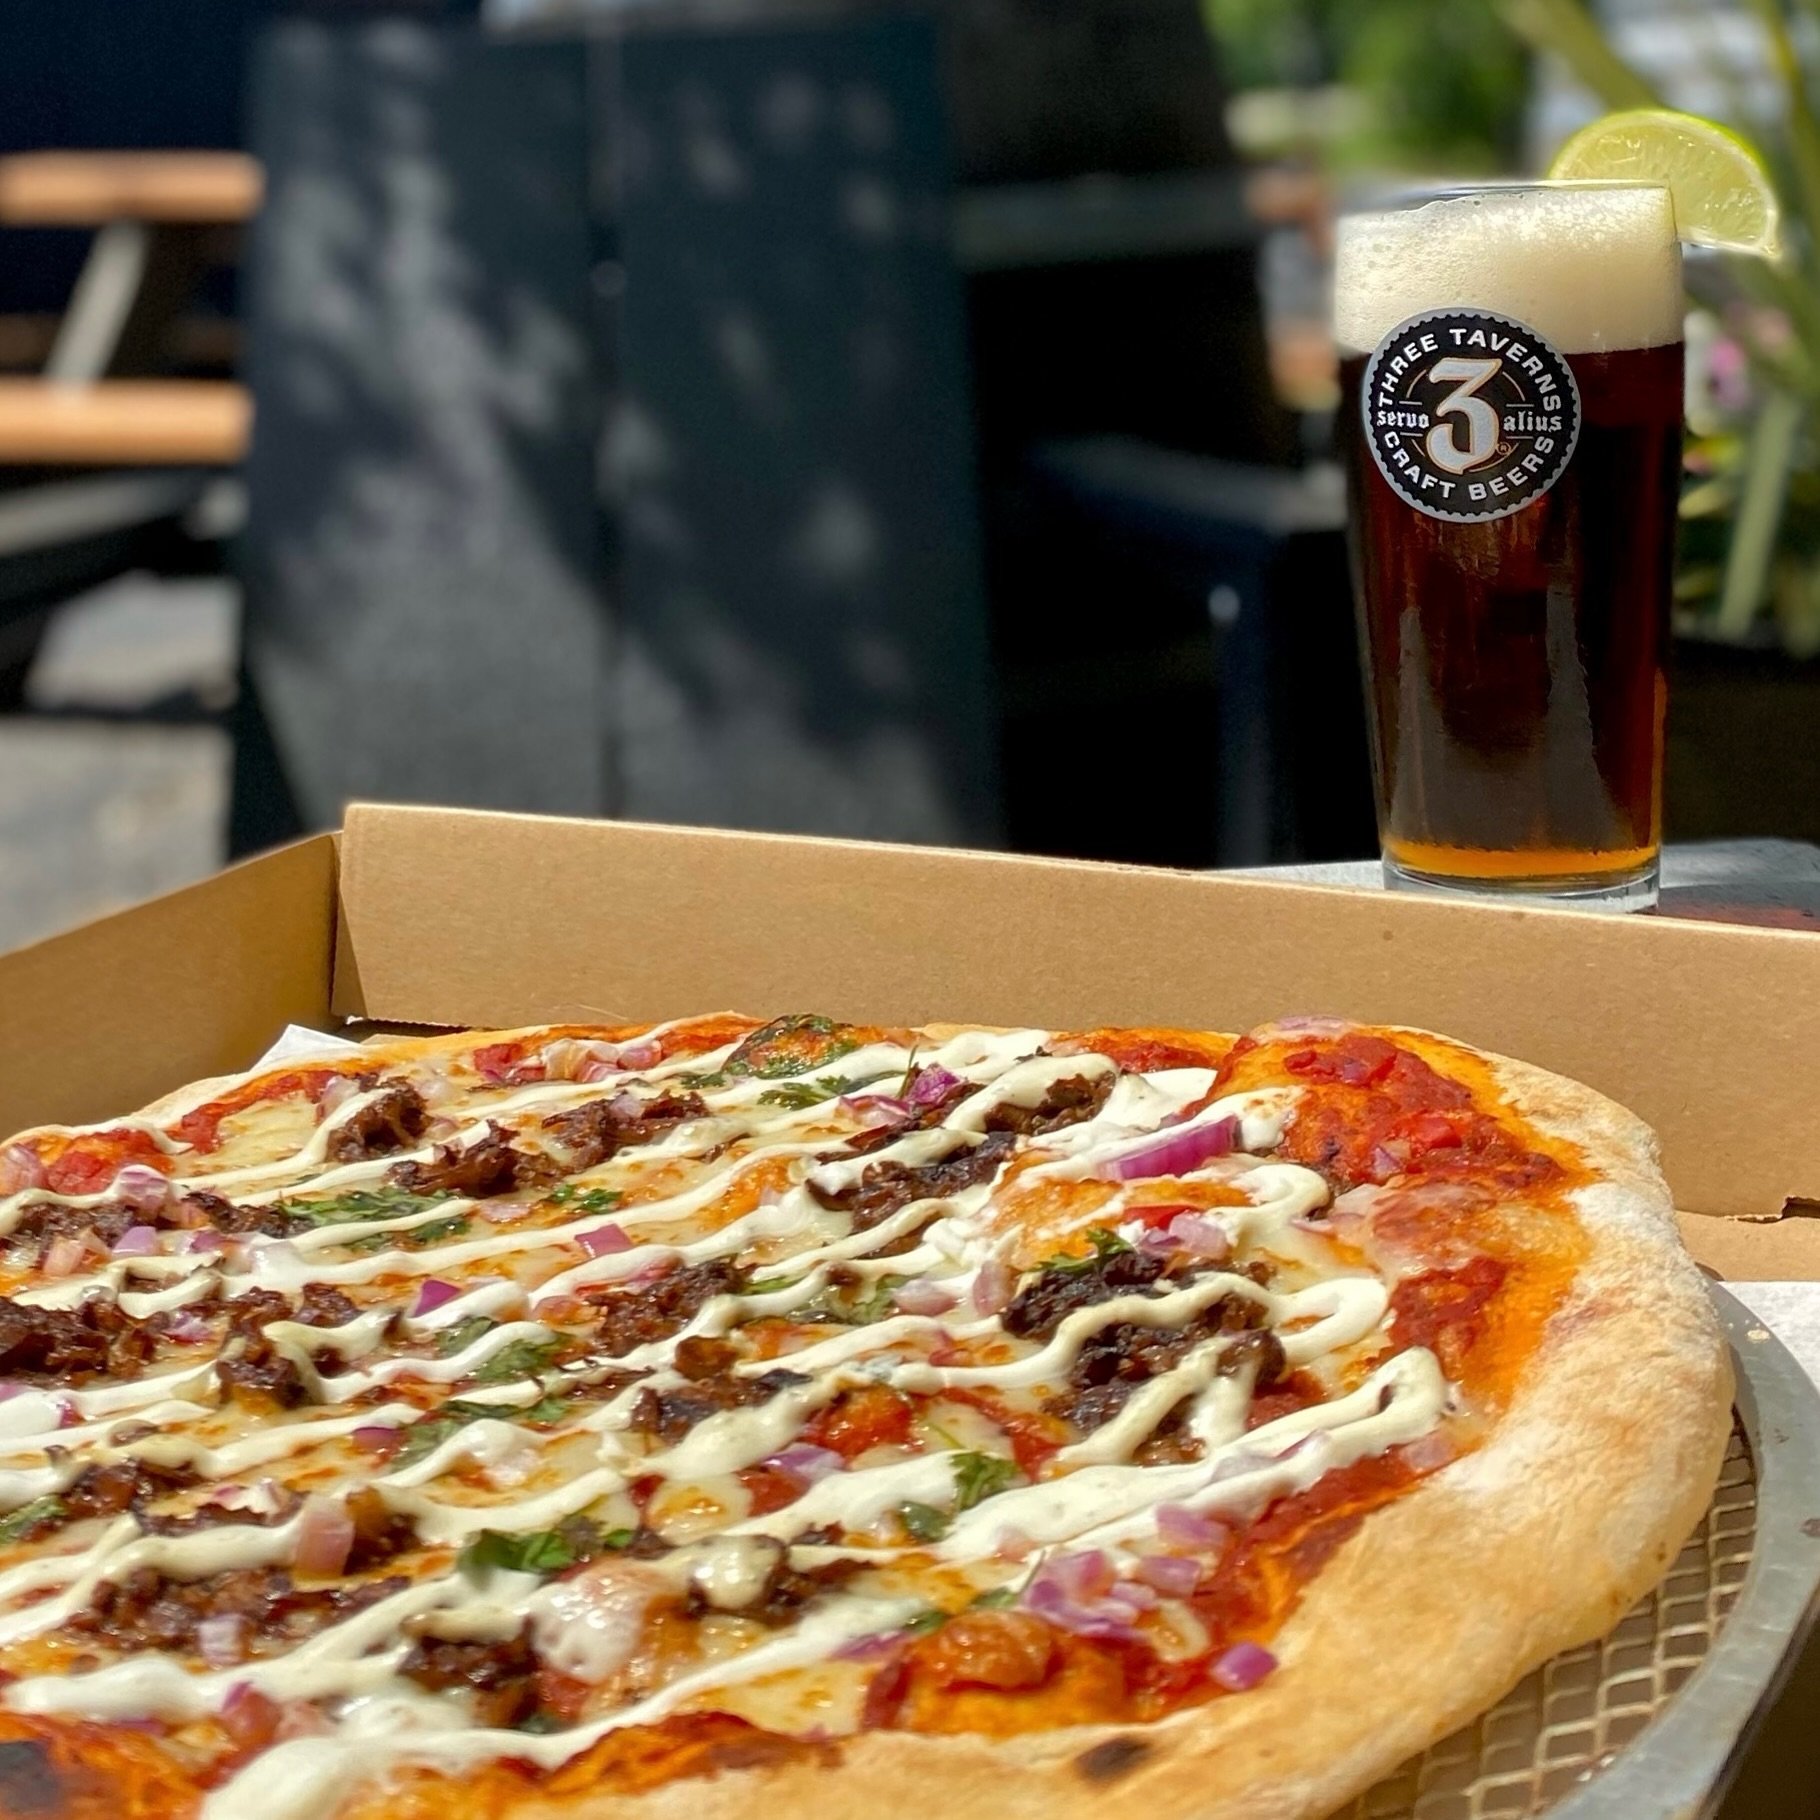 Come fiesta with us this Sunday for Cinco de Mayo where we&rsquo;ll have refreshing drinks like our Mexican dark lager, Pistoleer, complete with lime wedge for the occasion, and a special Mexican pizza from @prosperhouse_atl . Viva Mexico! 🇲🇽